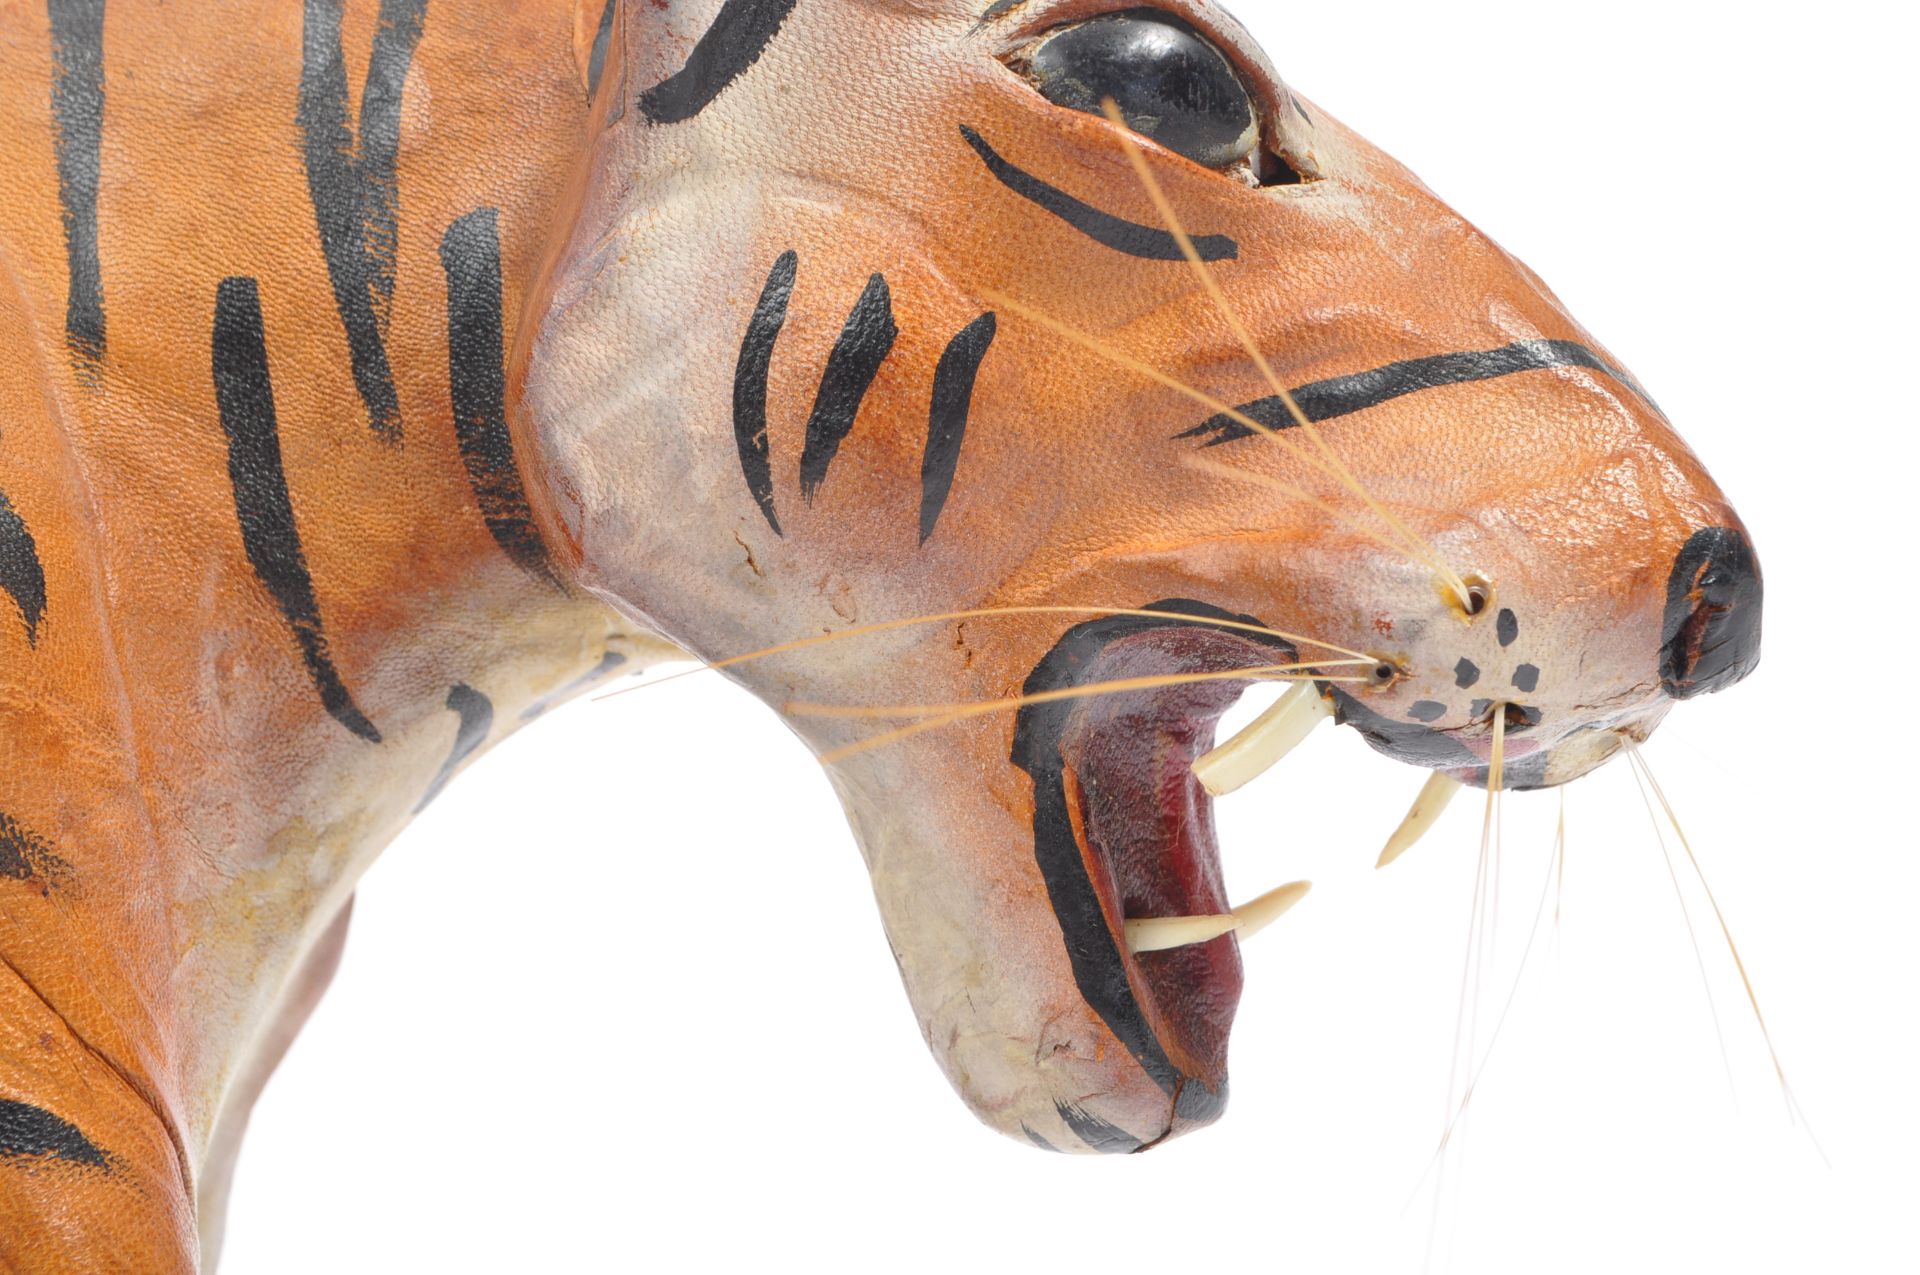 20TH CENTURY FRENCH PAINTED LEATHER TIGER FIGURE - Image 9 of 9